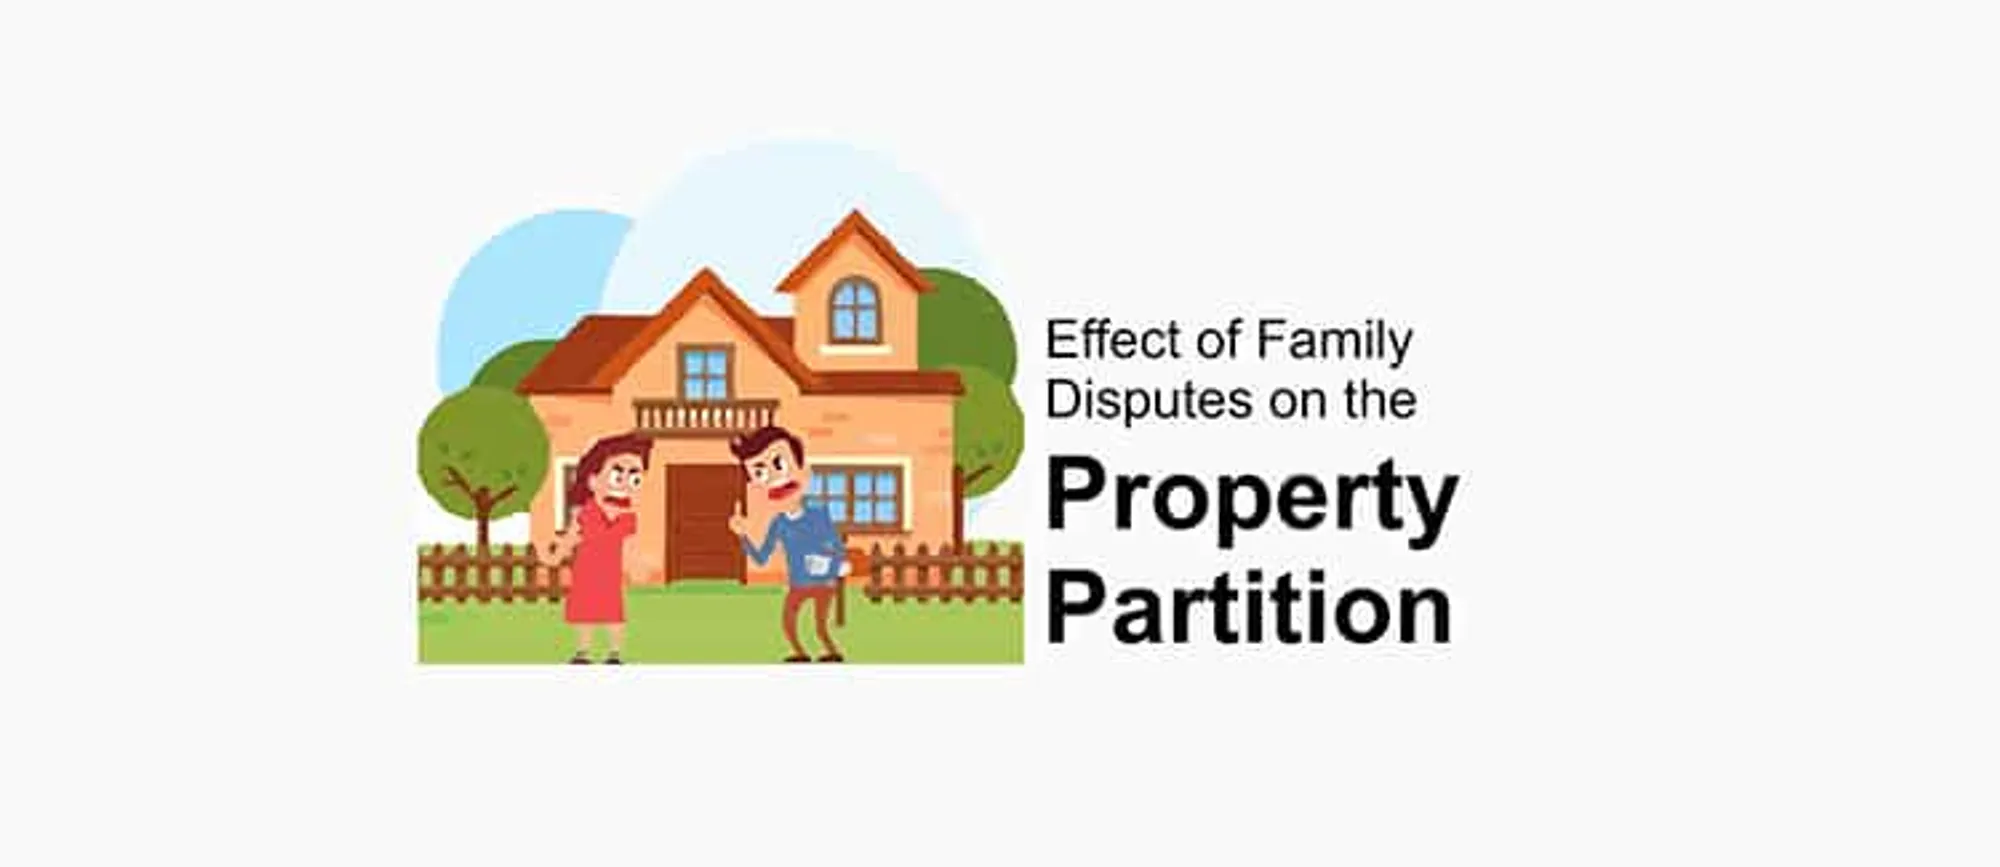 Effects of Family Disputes on the Partition of Property in India